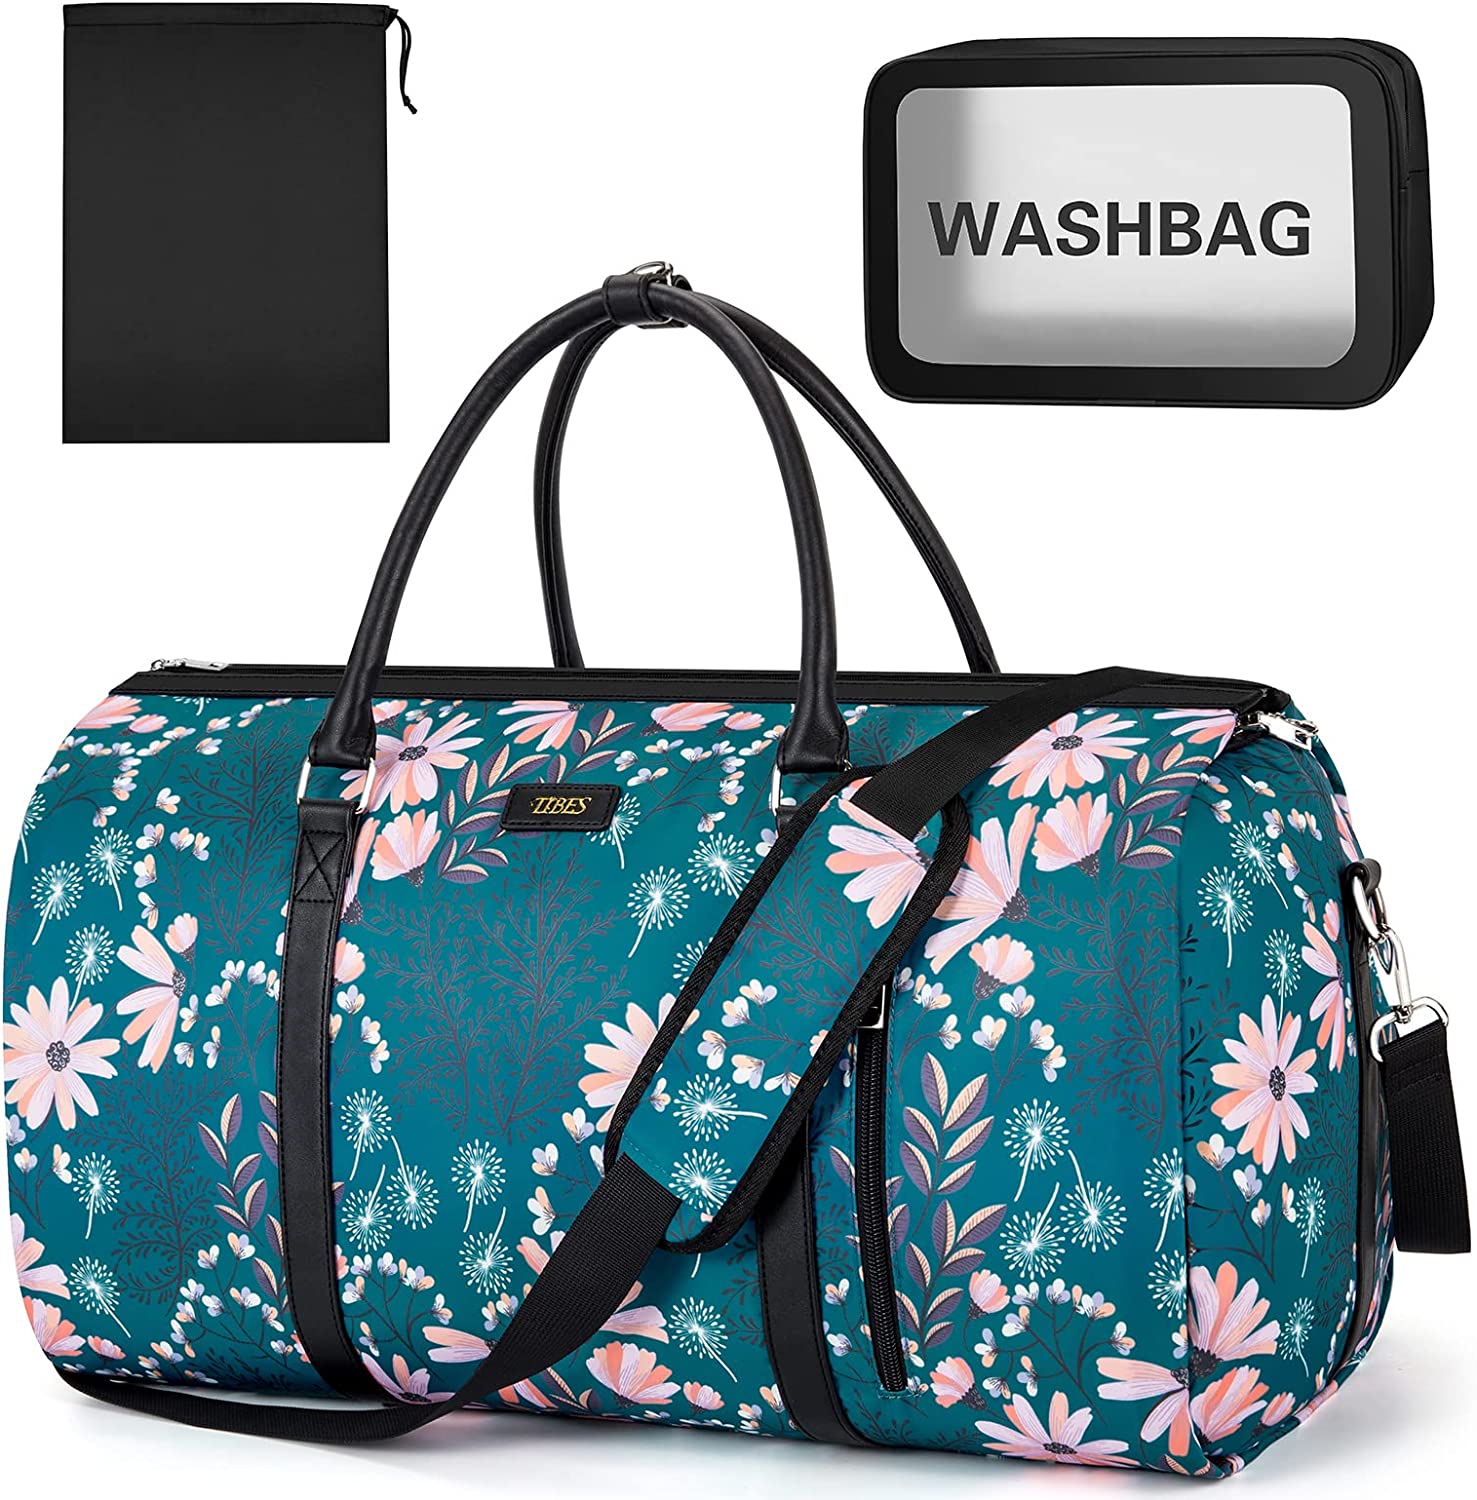 Garment Bag for Travel Convertible Carry On Garment Bag Large Travel Duffel Bags for Women 2 in 1 Hanging Suitcase Suit Travel Bags for Women & Men 3pcs Set, F-Navy Floral